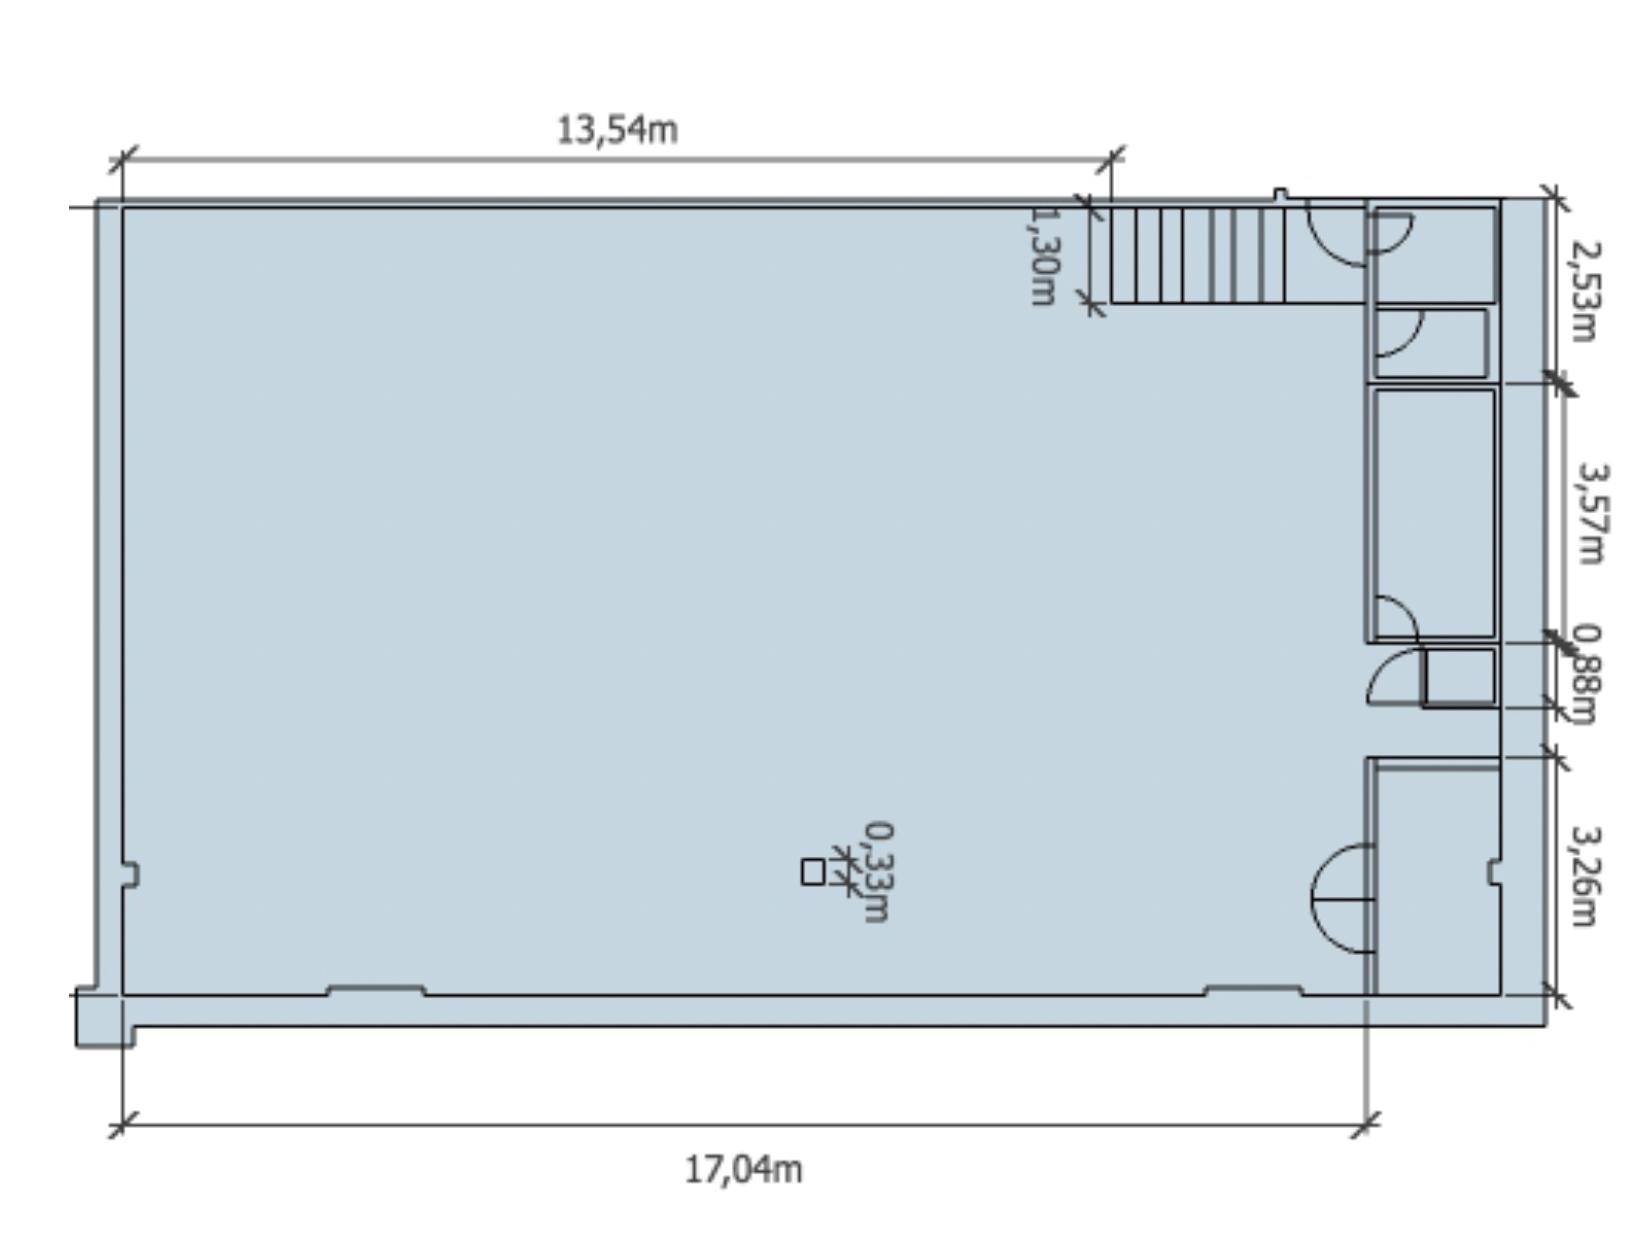 A floor plan of the studio. The main space is 17x10m, and 4 smaller rooms are 2,53m, 3,57m, 0,88m and 3,26m respectively.